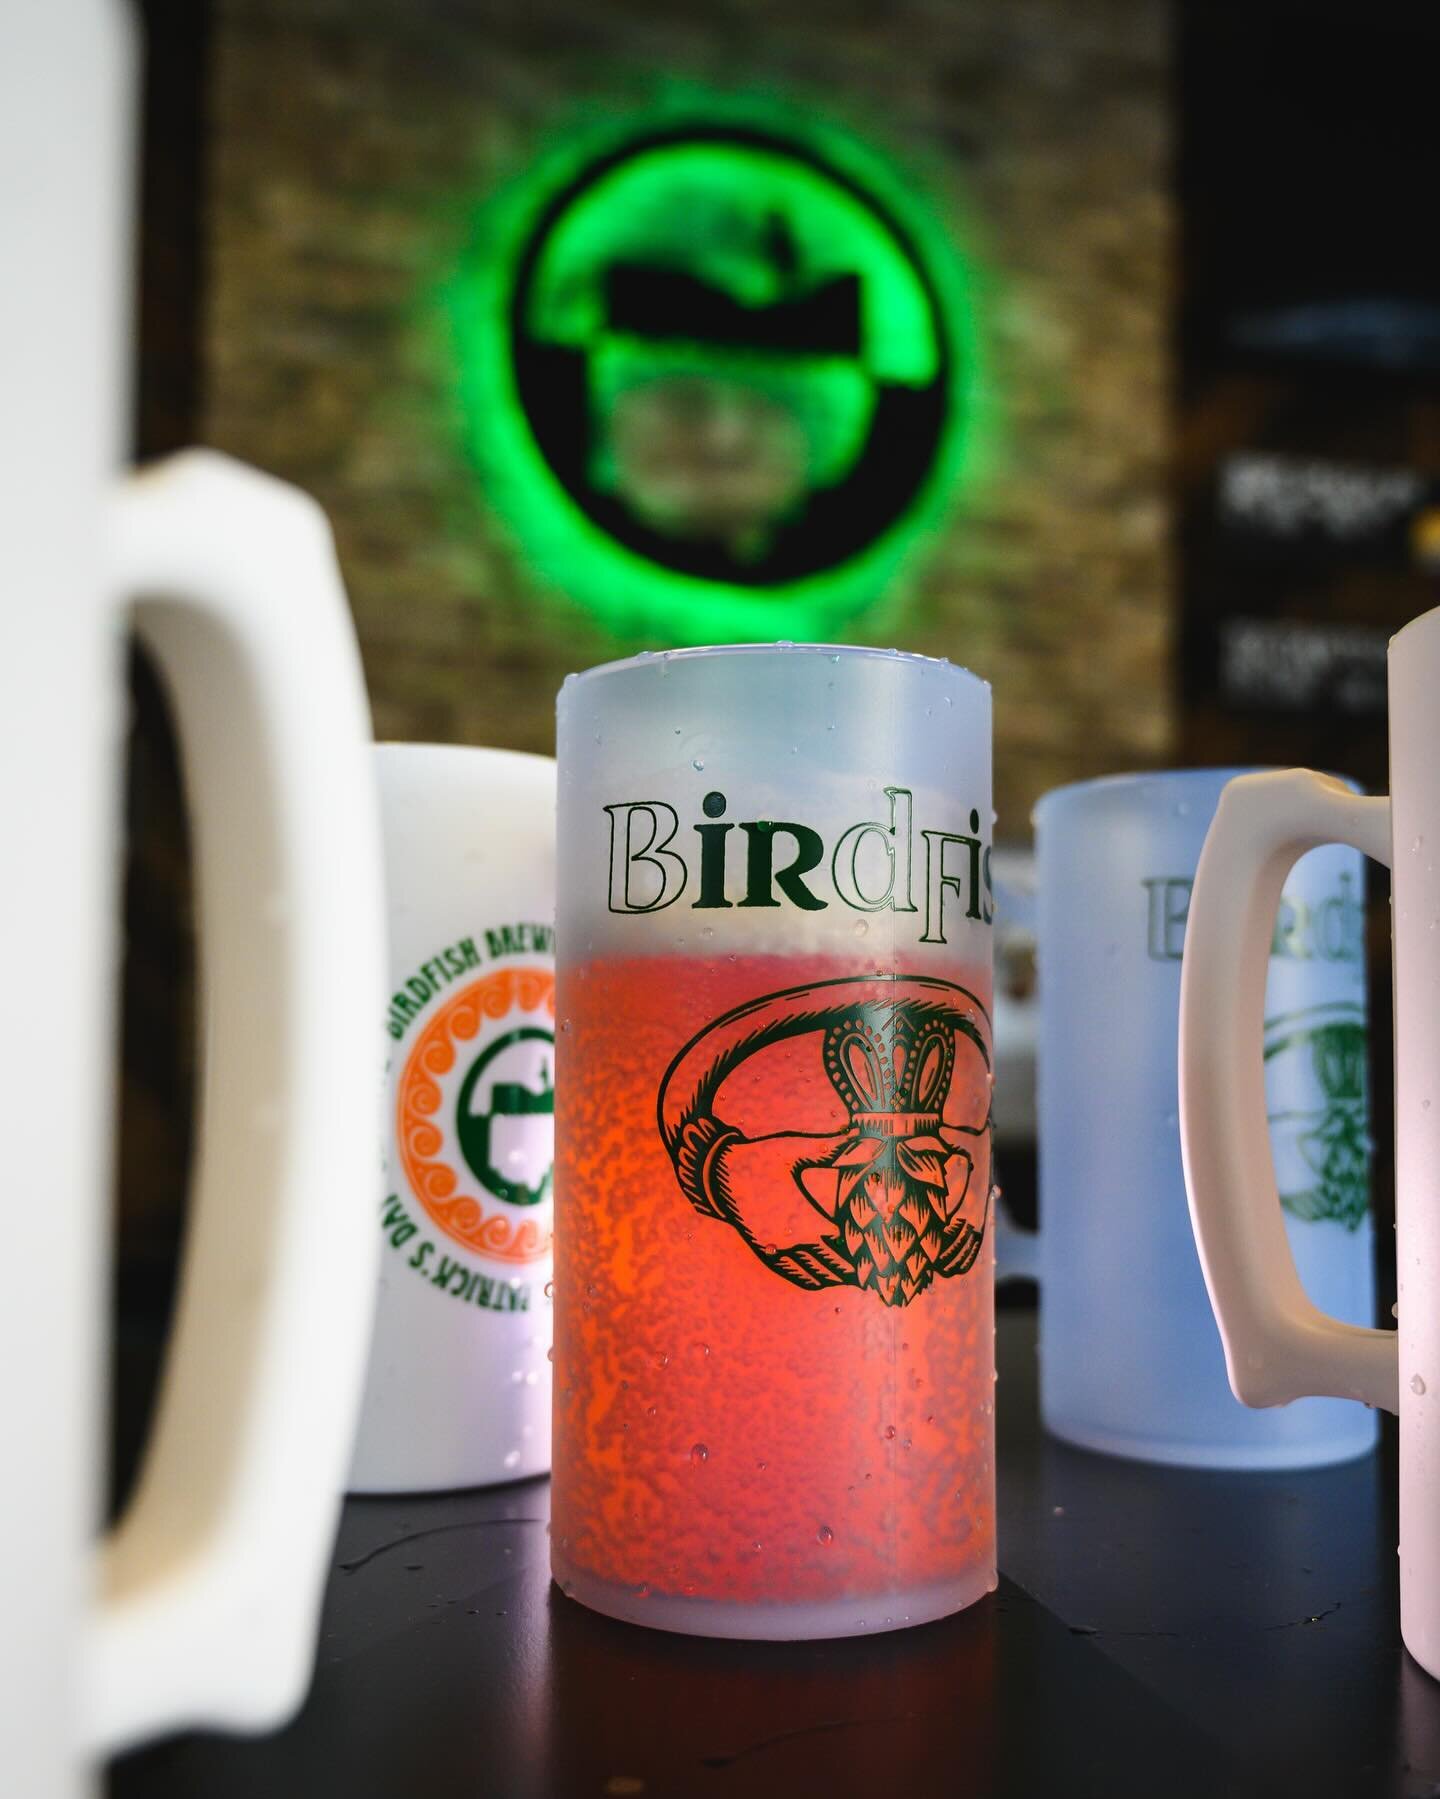 Get some rest, we&rsquo;ve got a big day tomorrow&hellip; Taproom doors open at 8AM with this @silipint stein inclusive for the first 100 Irish beers poured. @de_lishasfoodtruck &amp; @frytanic_foodtruck bringing the Celtic cuisine. Live Irish Music 